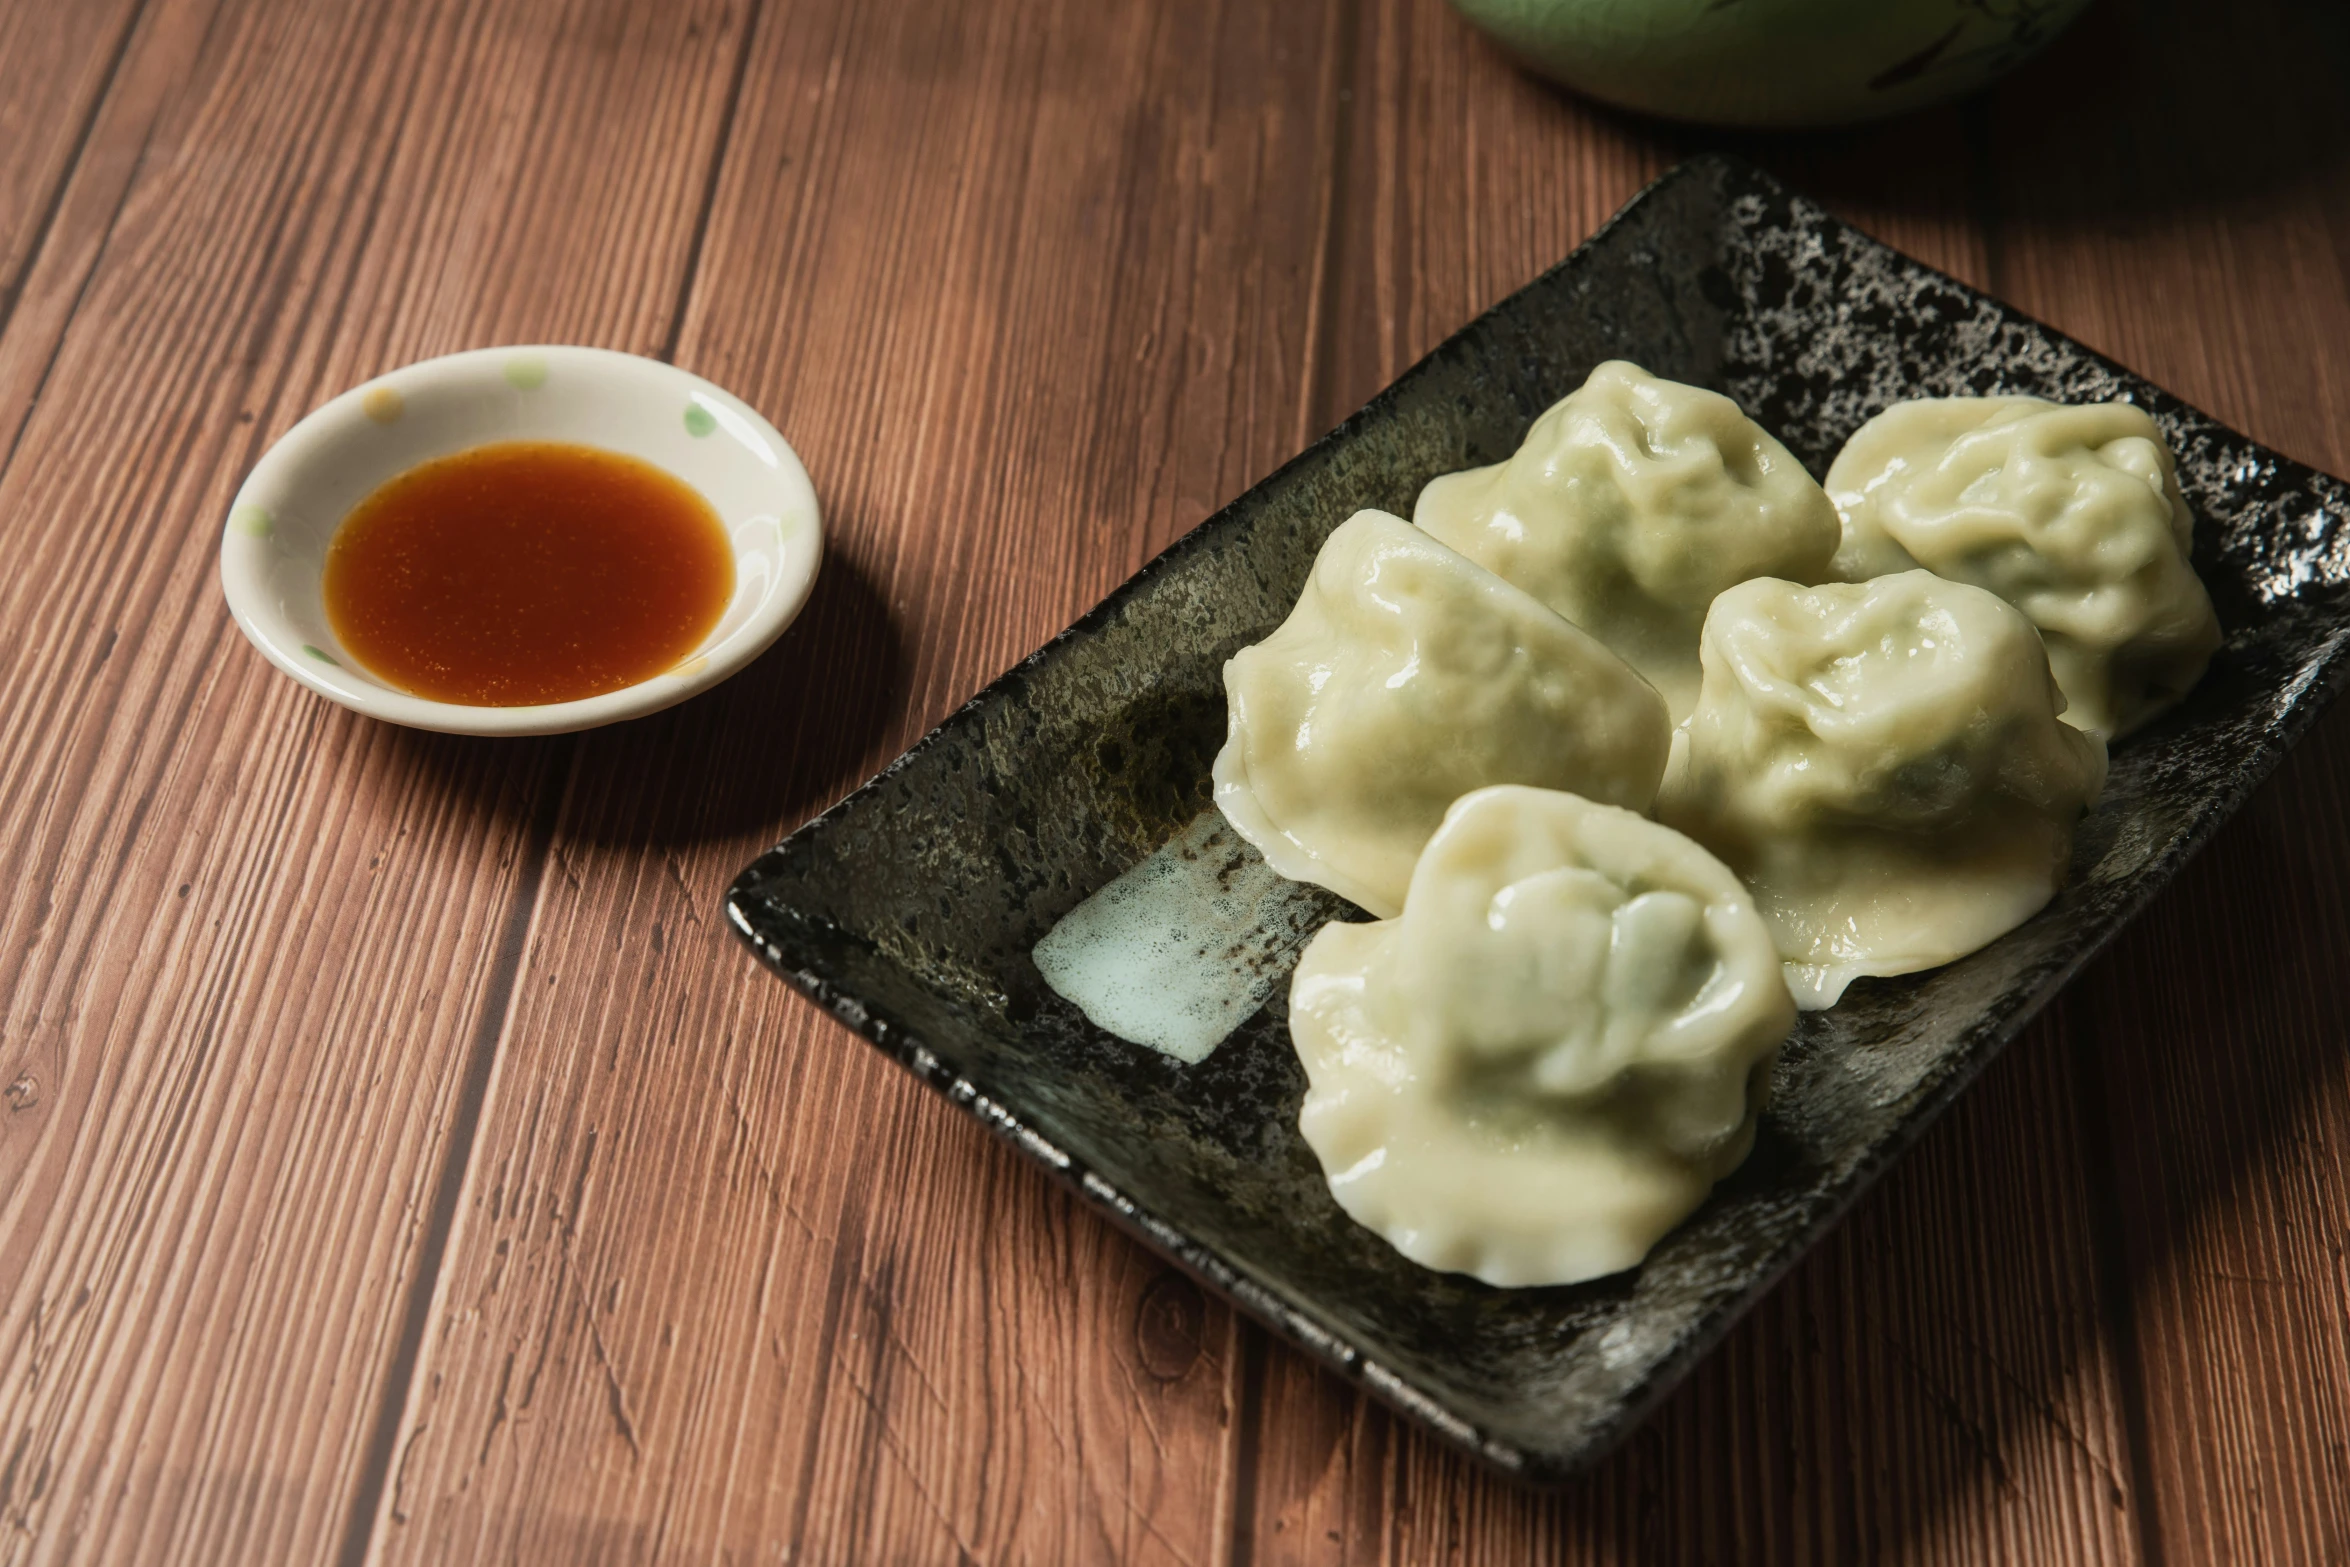 a plate of dumplings is next to a small bowl and sauce